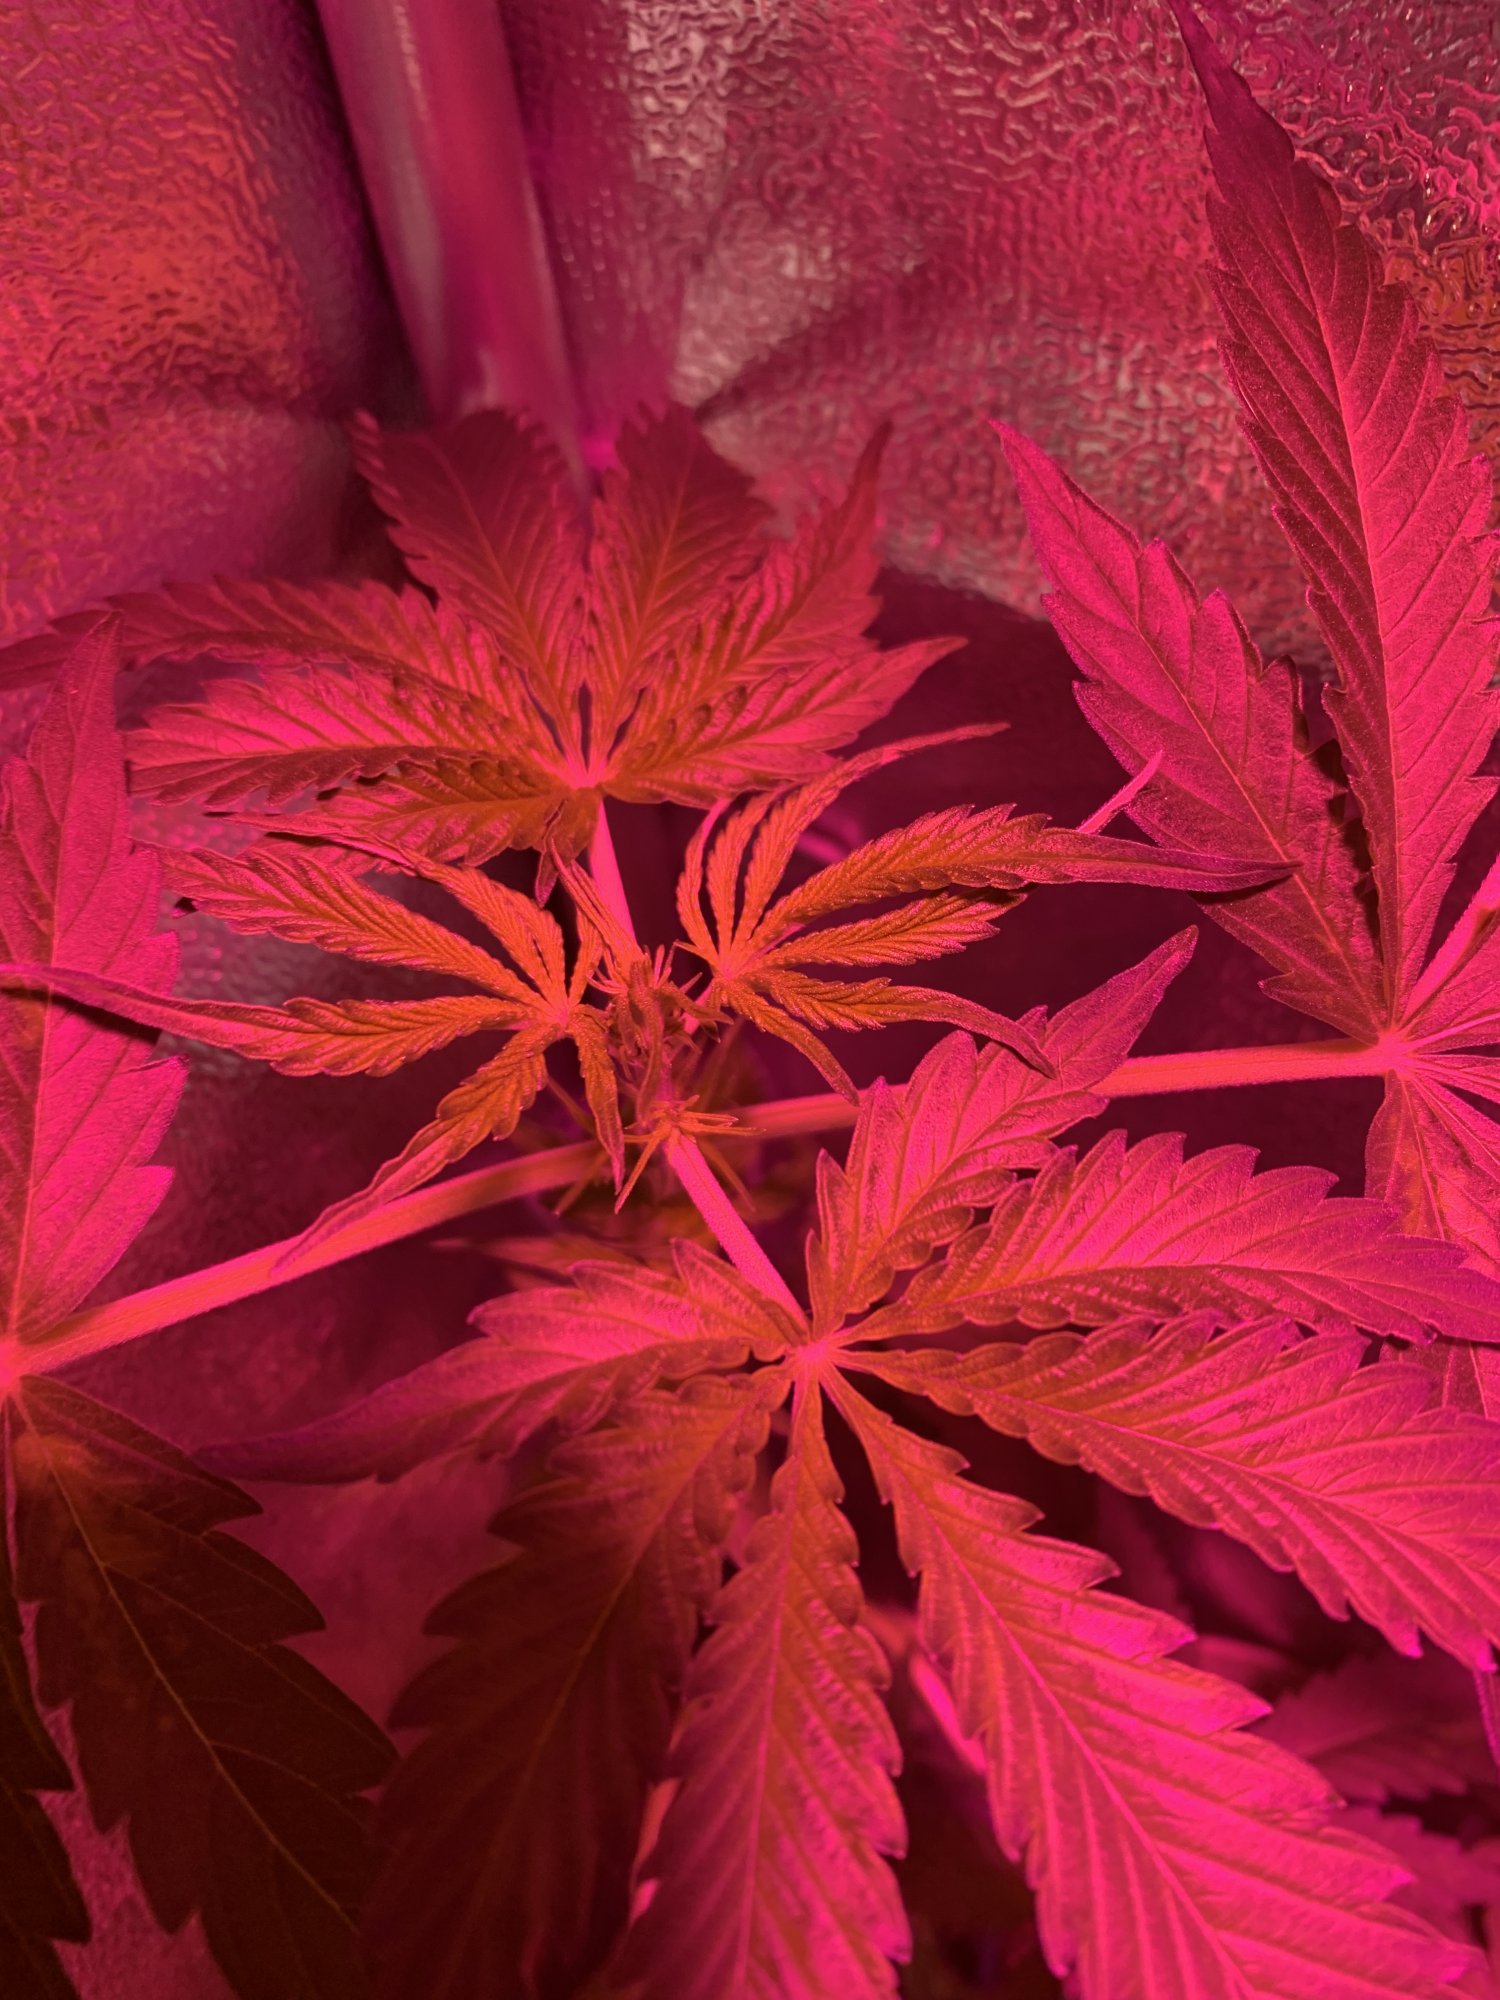 Nutrient deficiency or ph issues 4